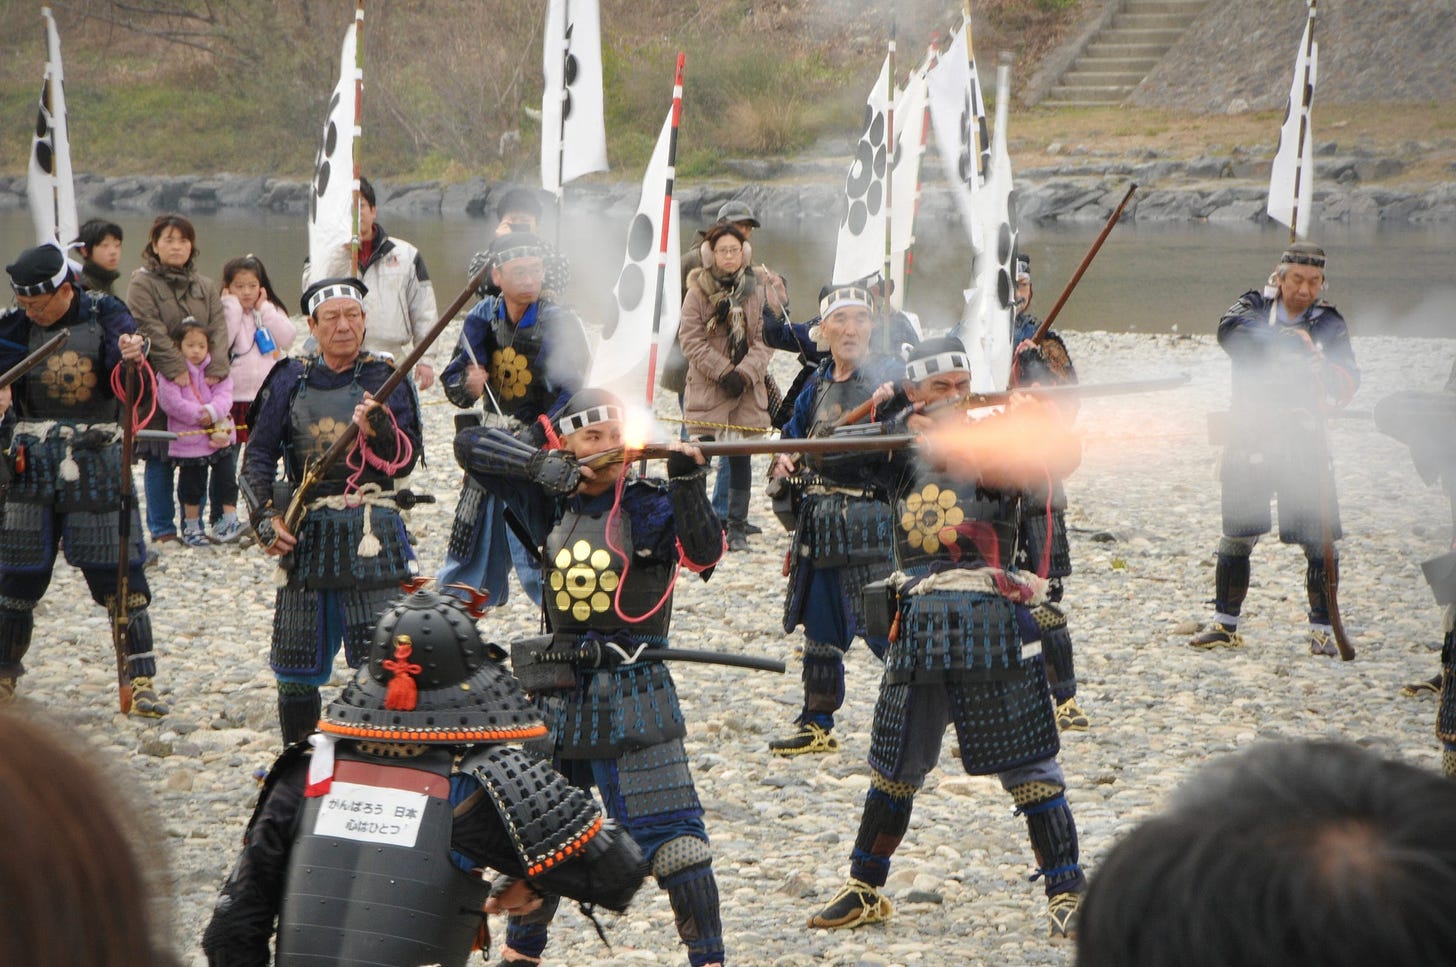 Japanese Warrior Firing Musket, Photo by Author